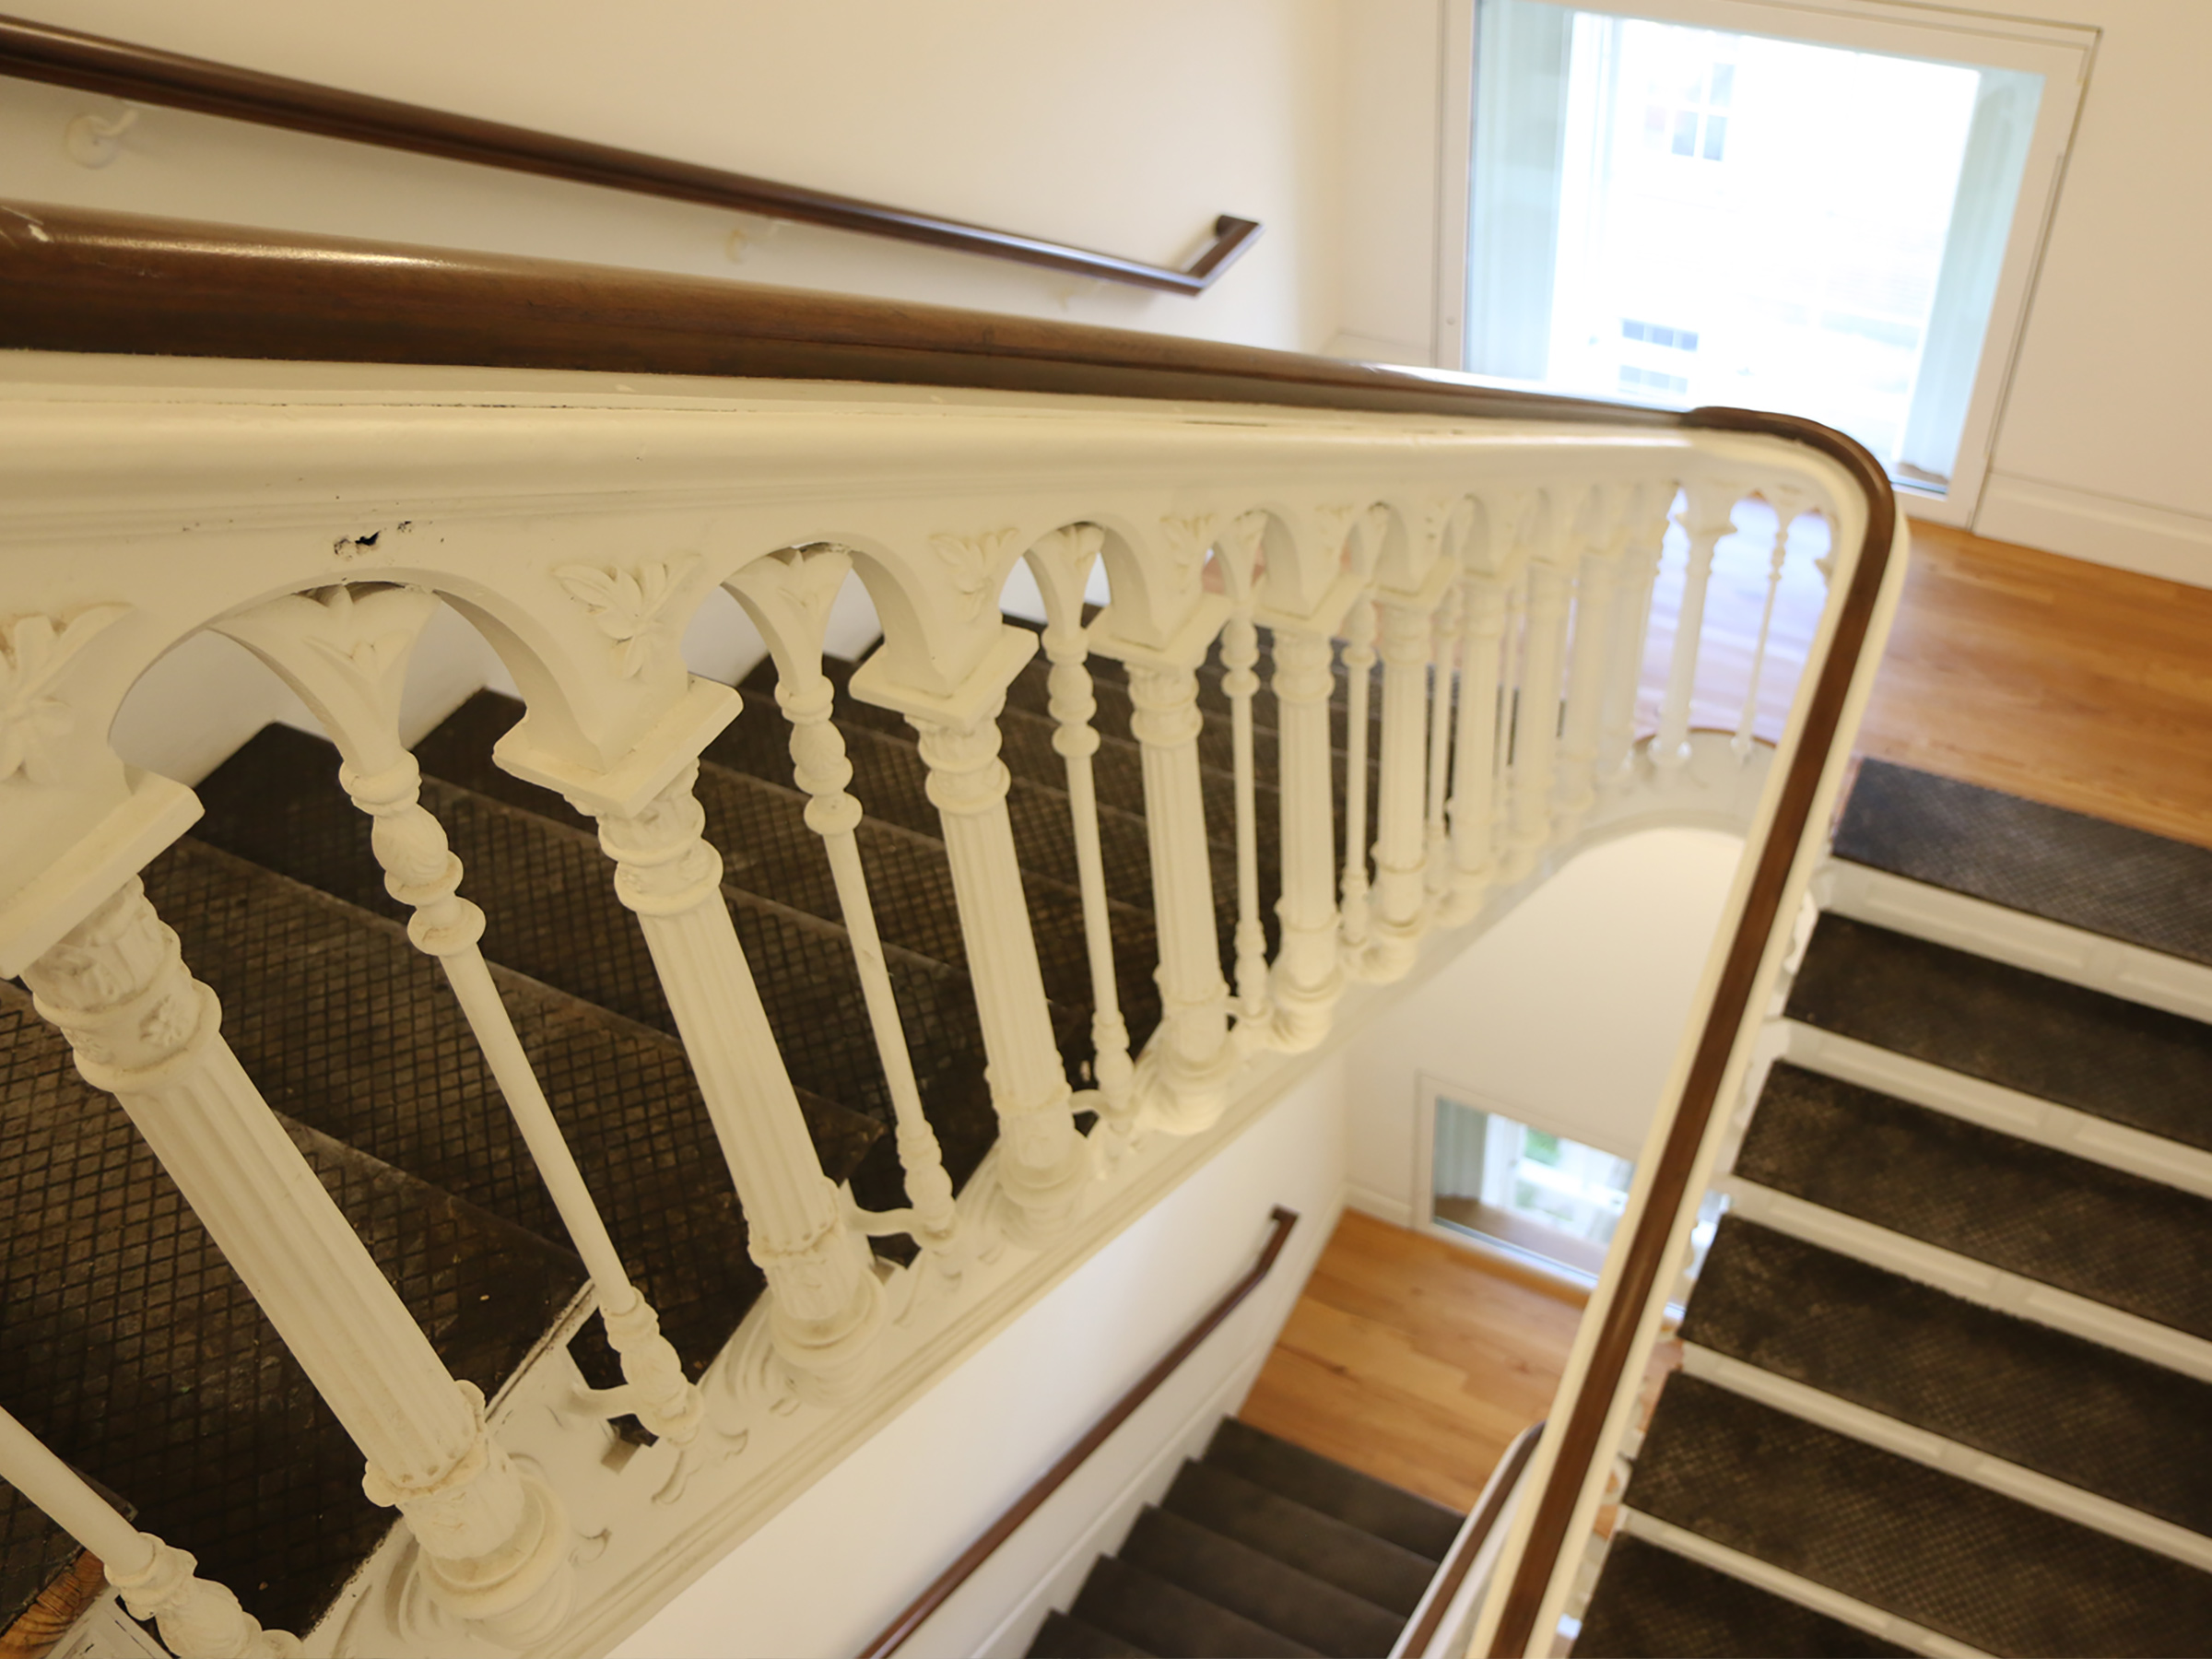 Photograph looking down a historic staircase with a brown banister and white balusters